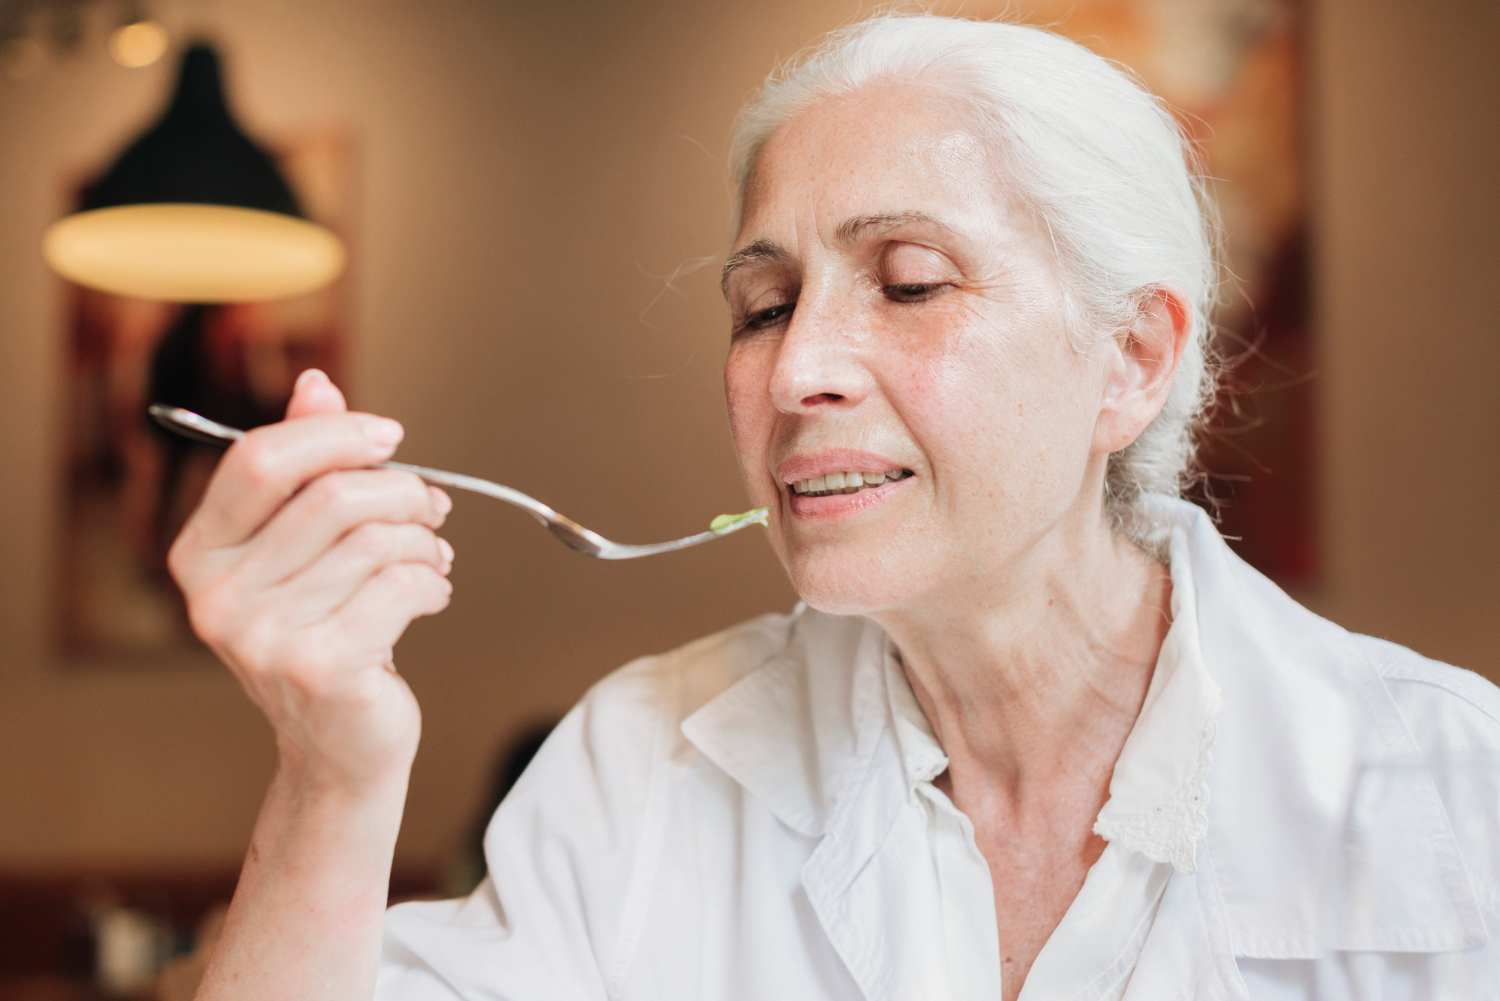 An older lady with white hair, wearing a plain white shirt, holds a fork with a single bite of food up to her mouth.